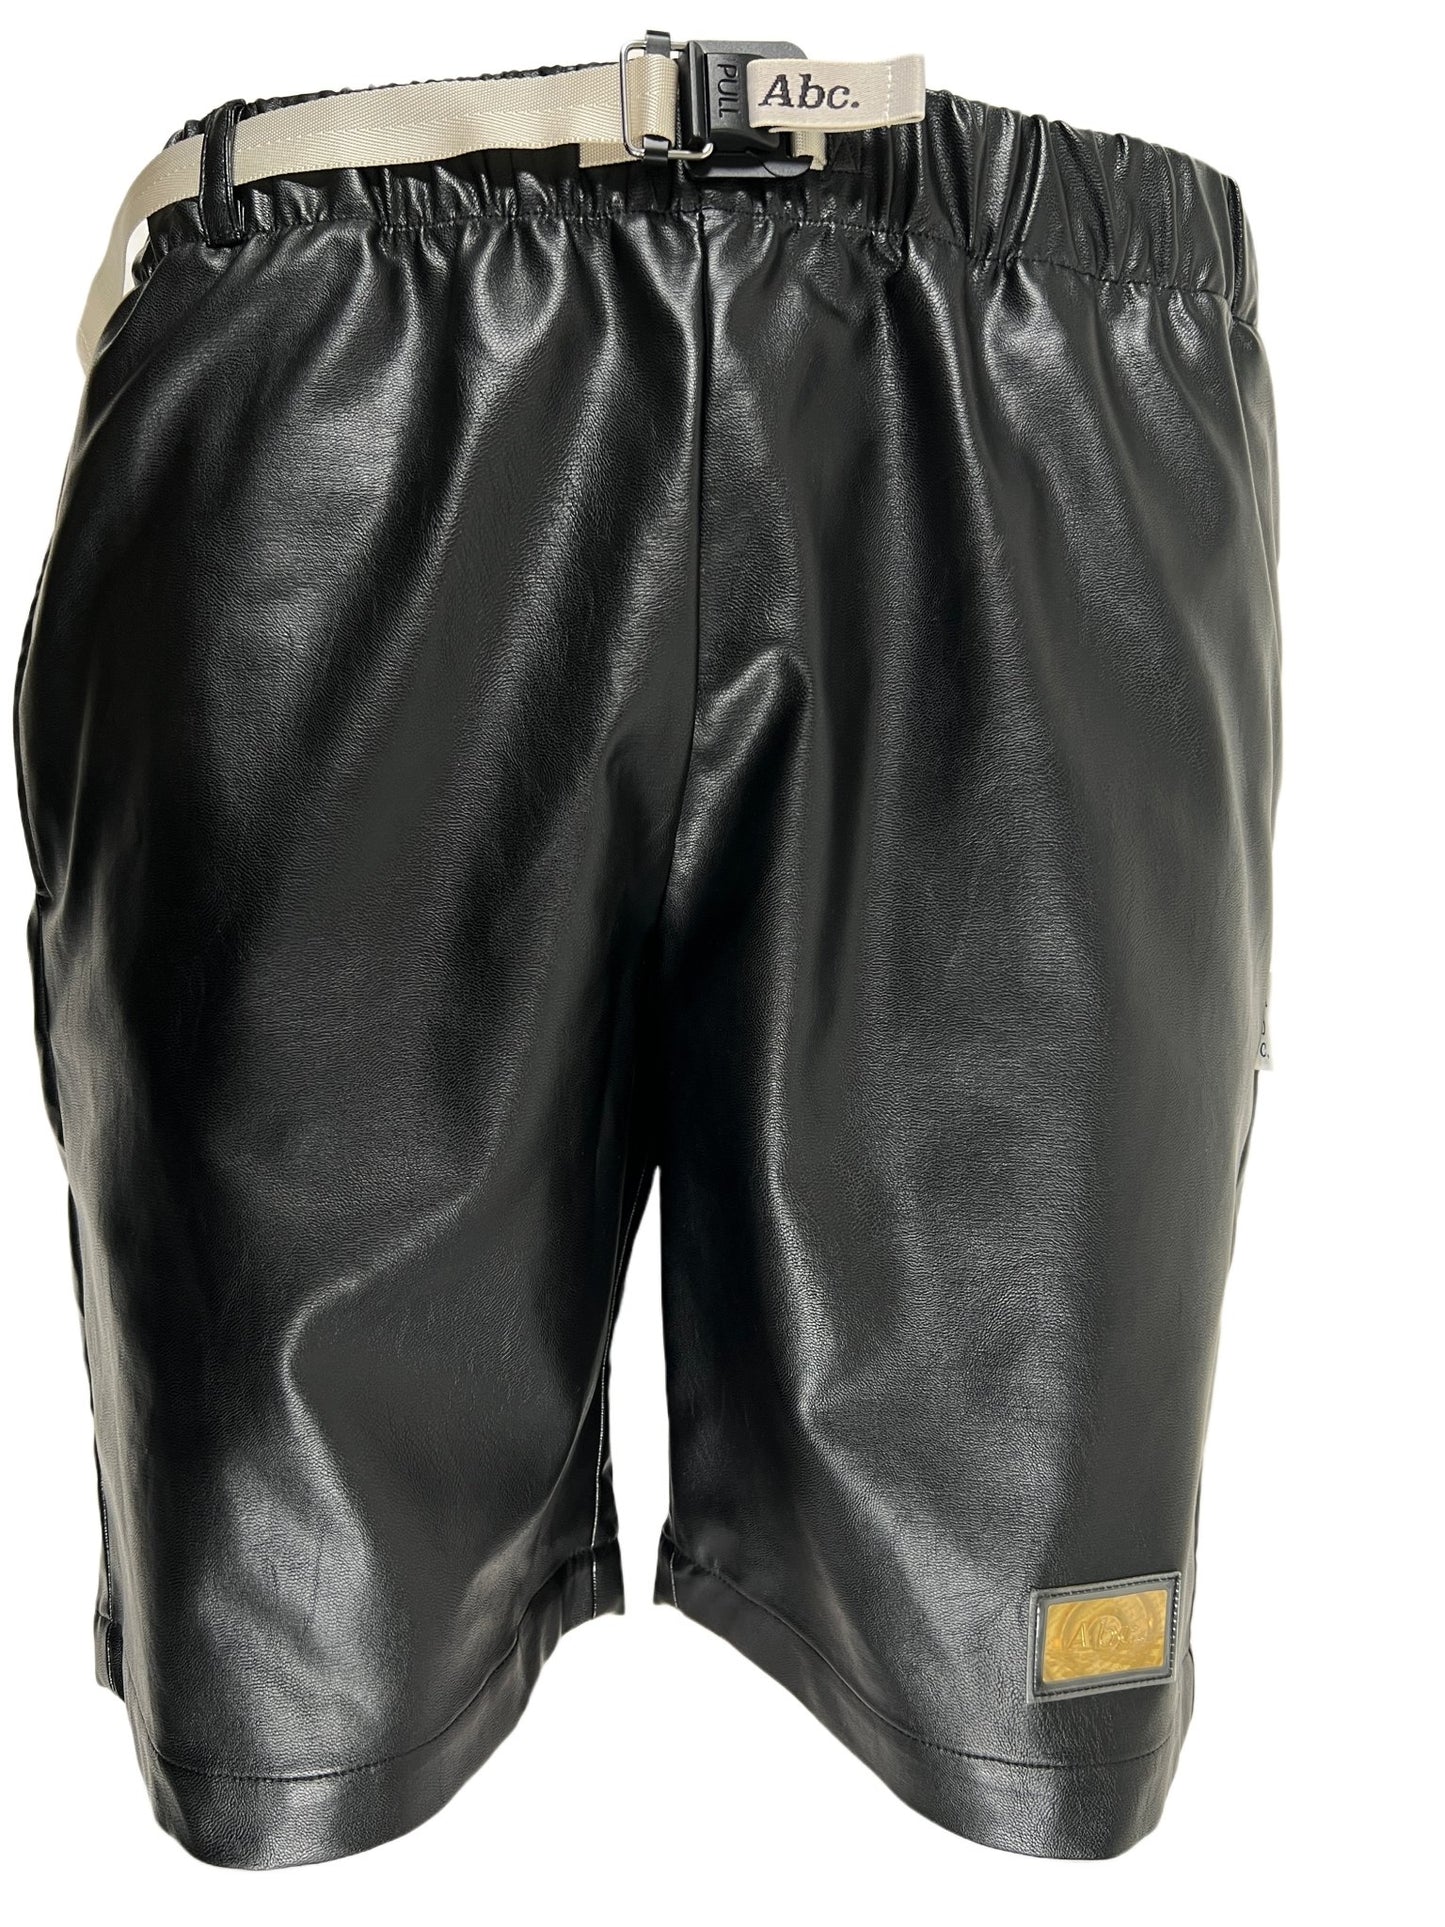 A black Advisory Board Crystals faux leather work shorts with a belt and buckle.